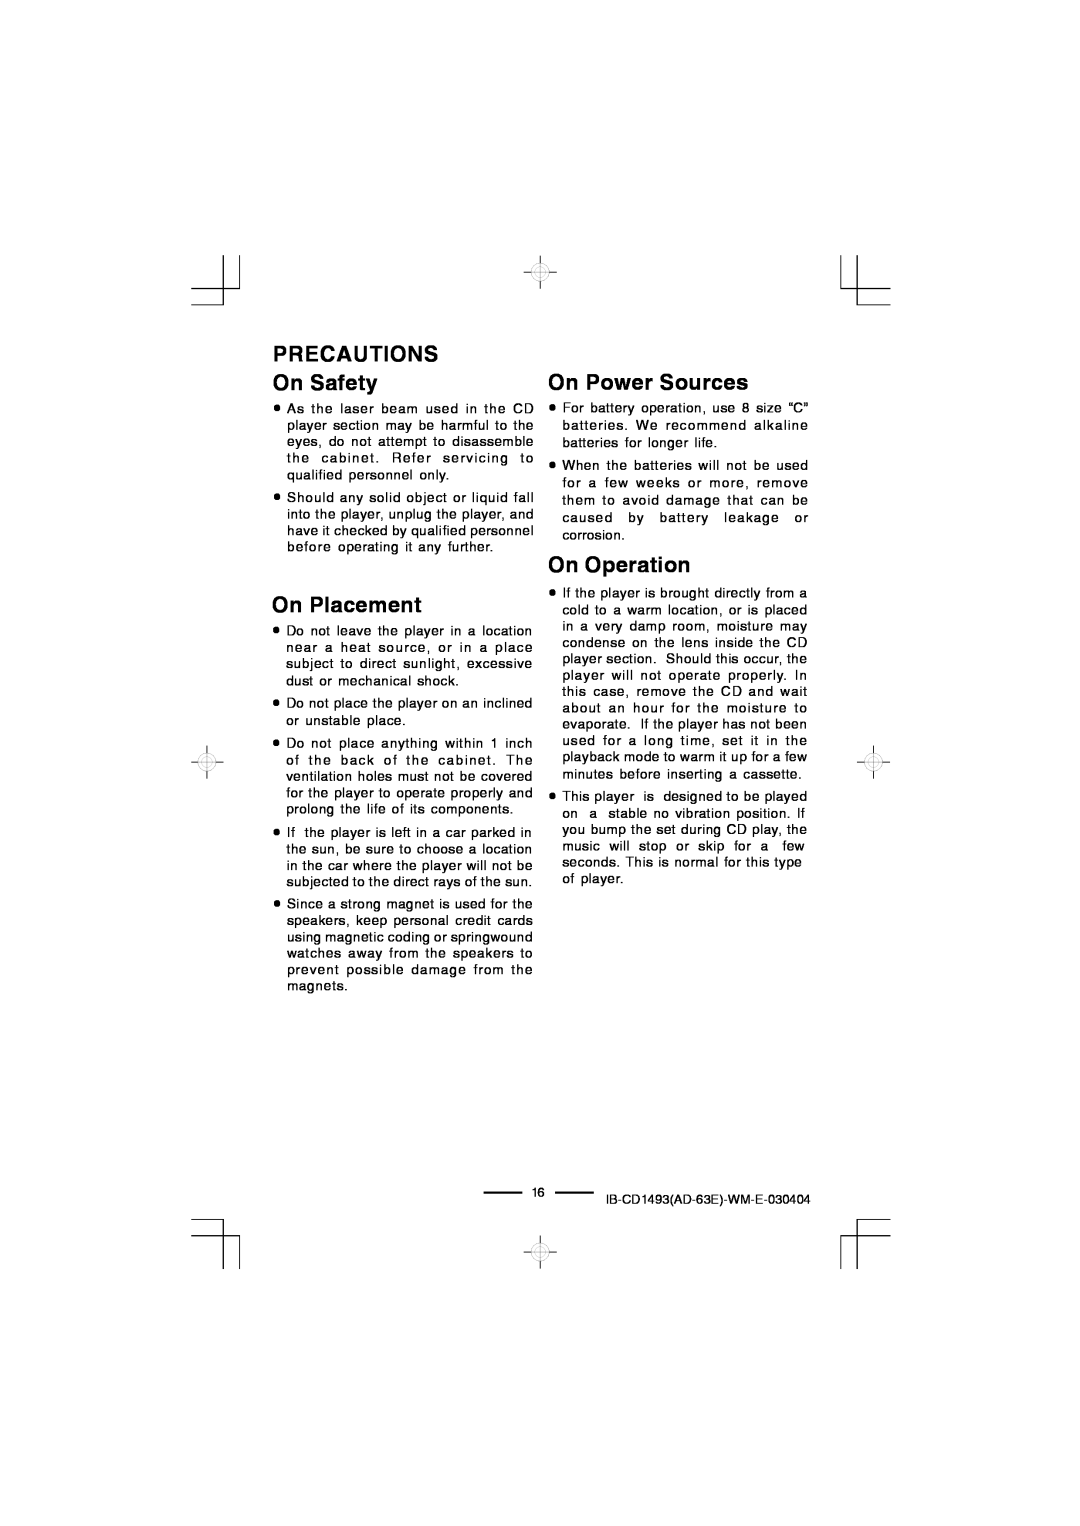 Lenoxx Electronics CD-1493 manual PRECAUTIONS On Safety, On Placement, On Power Sources, On Operation 